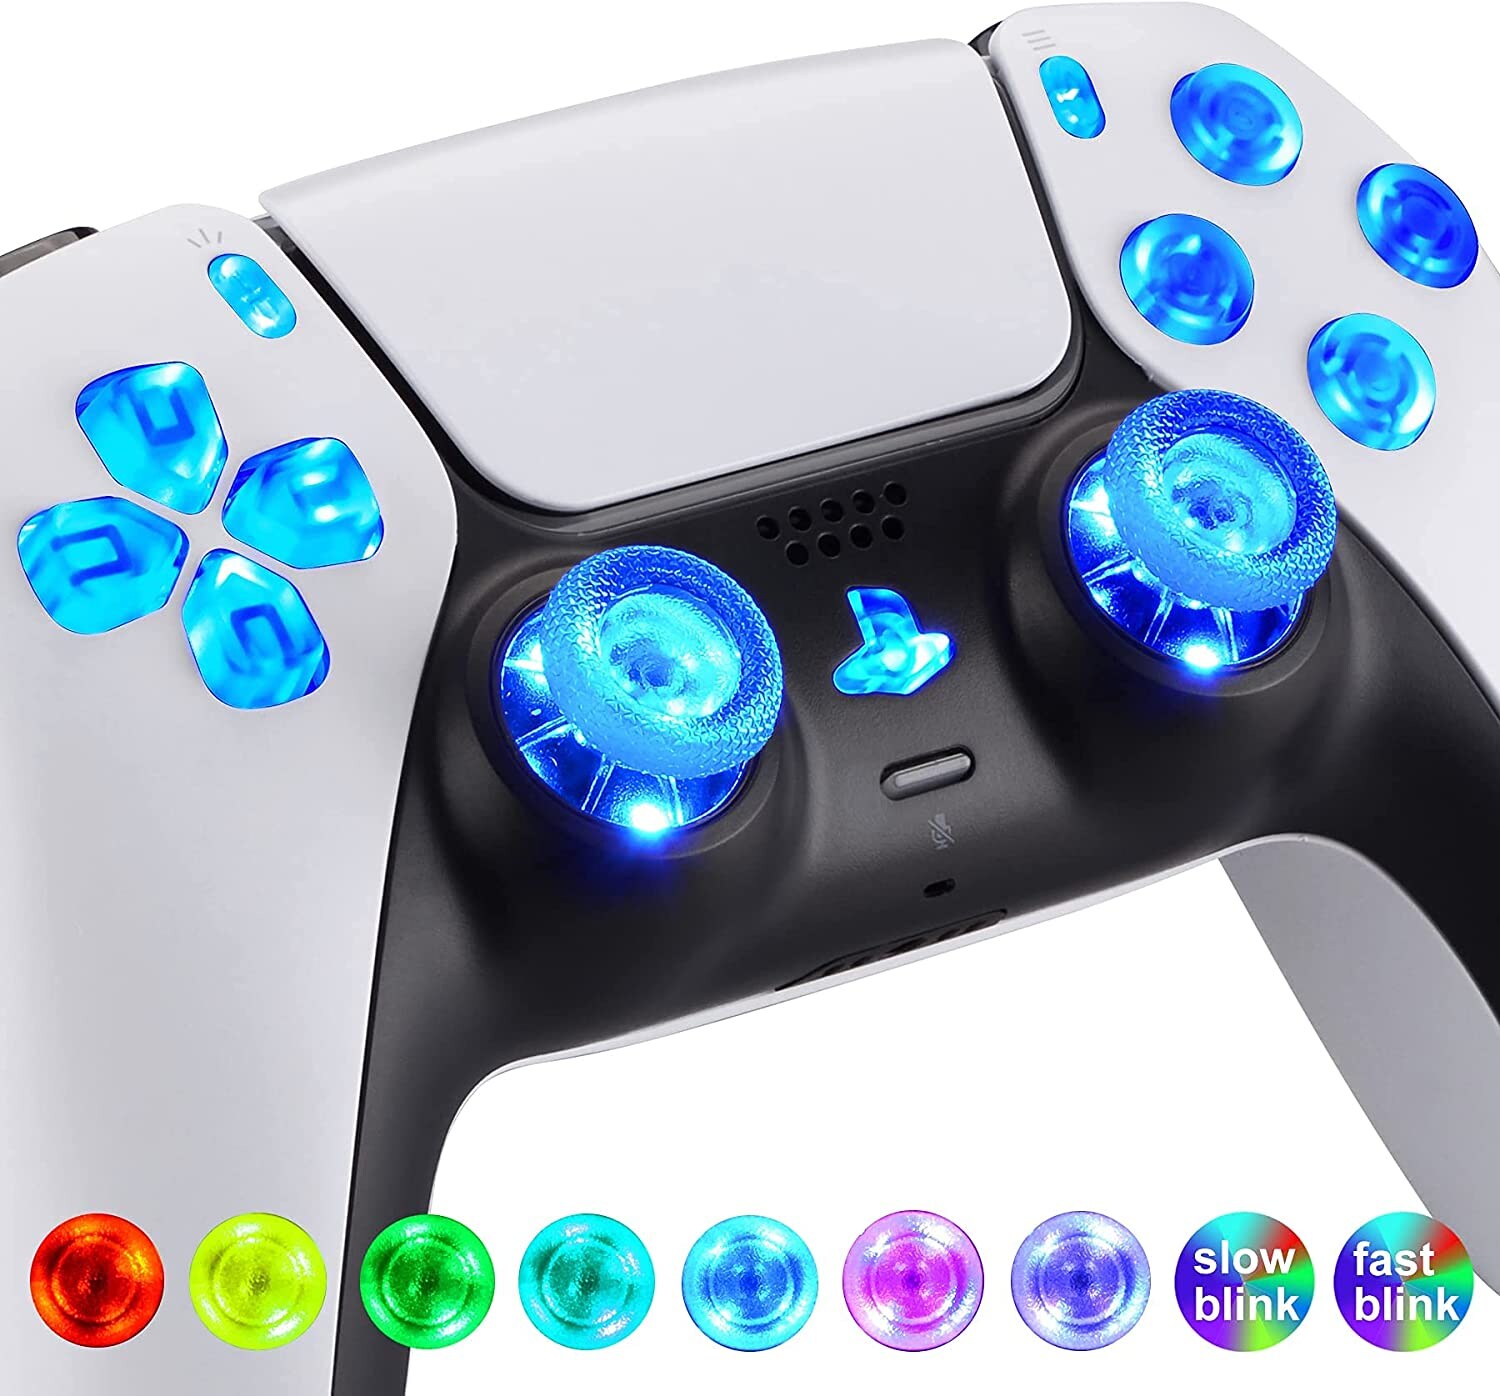 Multi-Colors luminated D-pad Thumbstick Share Option Home Face Buttons for PS5 Controller BDM-010 7 Colors DTF LED Kit Gaming - 5